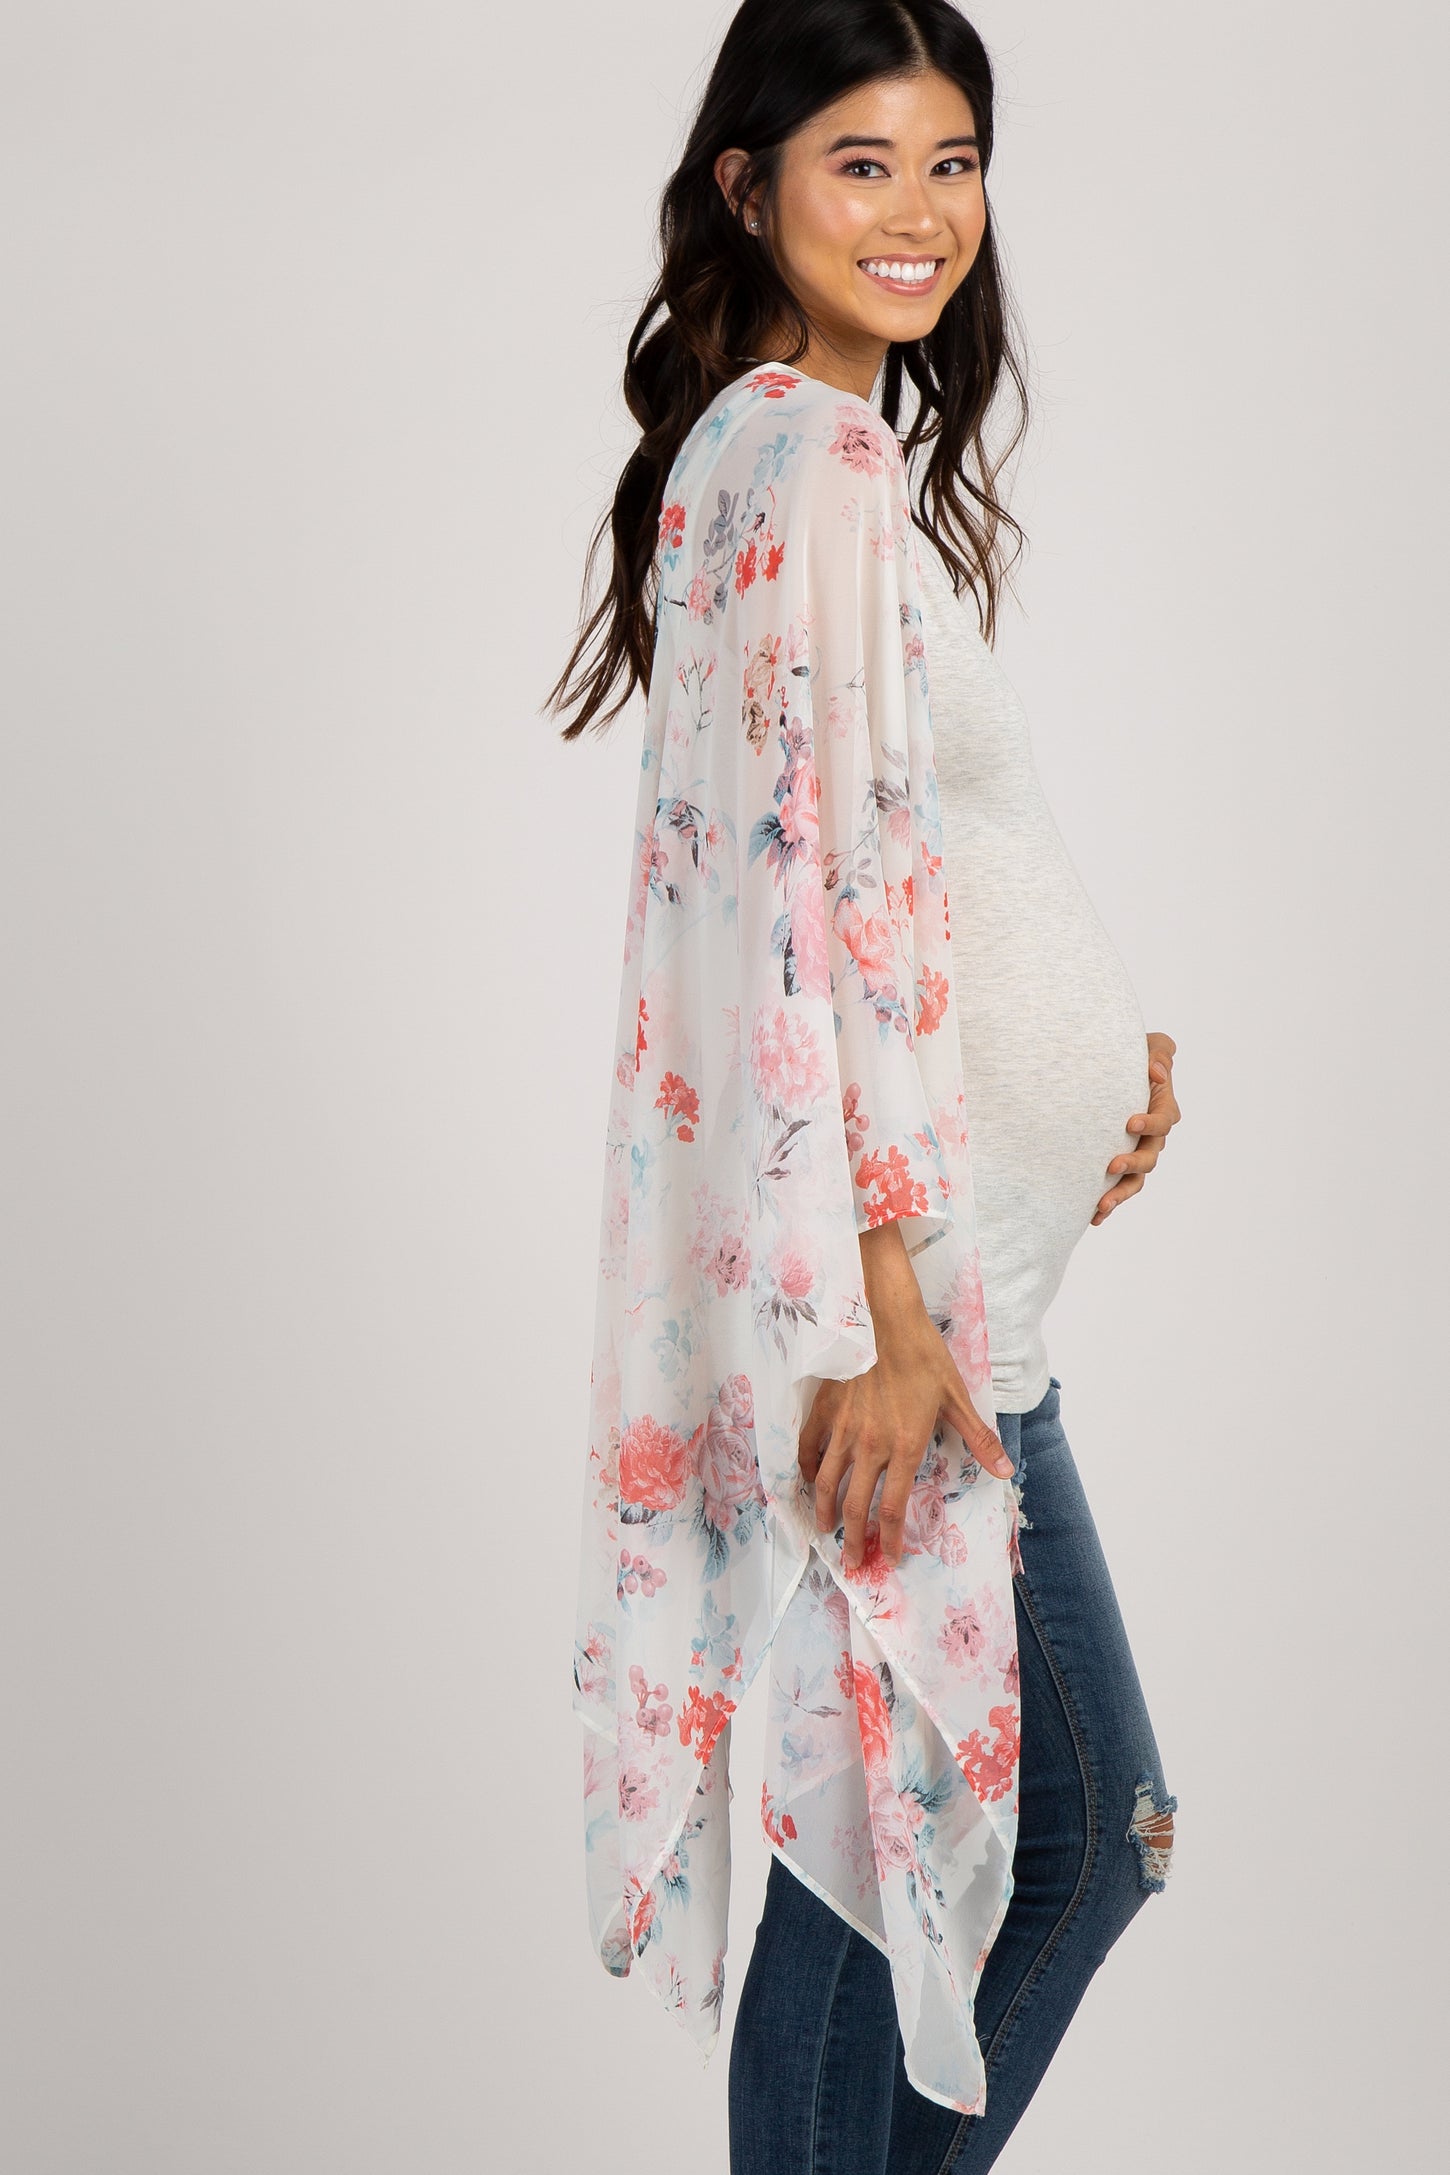 PinkBlush White Floral Maternity Cover Up